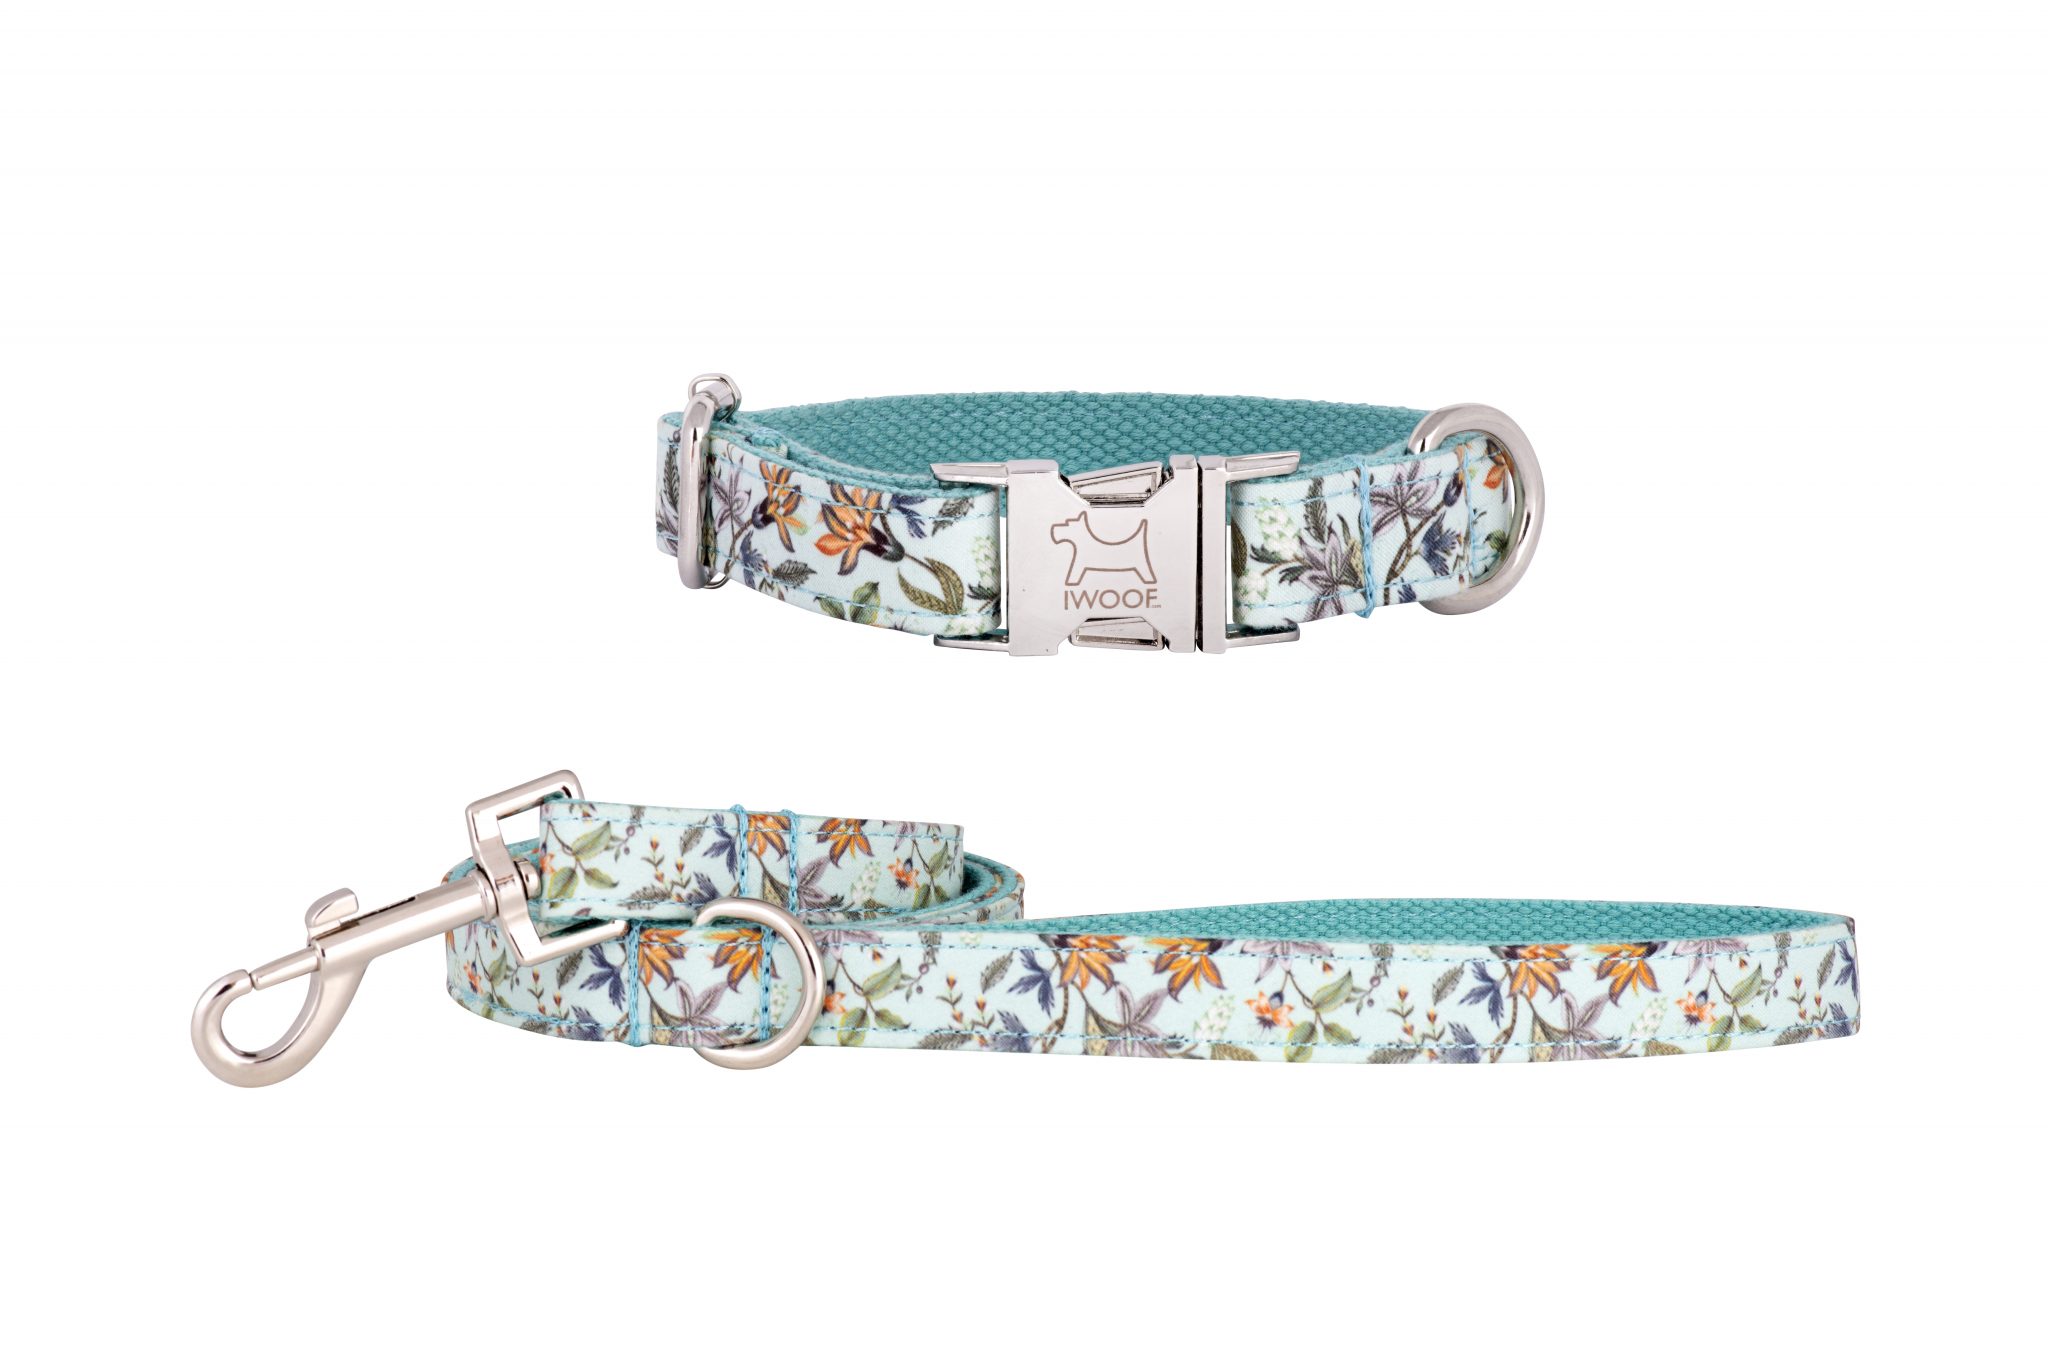 Meadow designer dog collar and dog lead by IWOOF